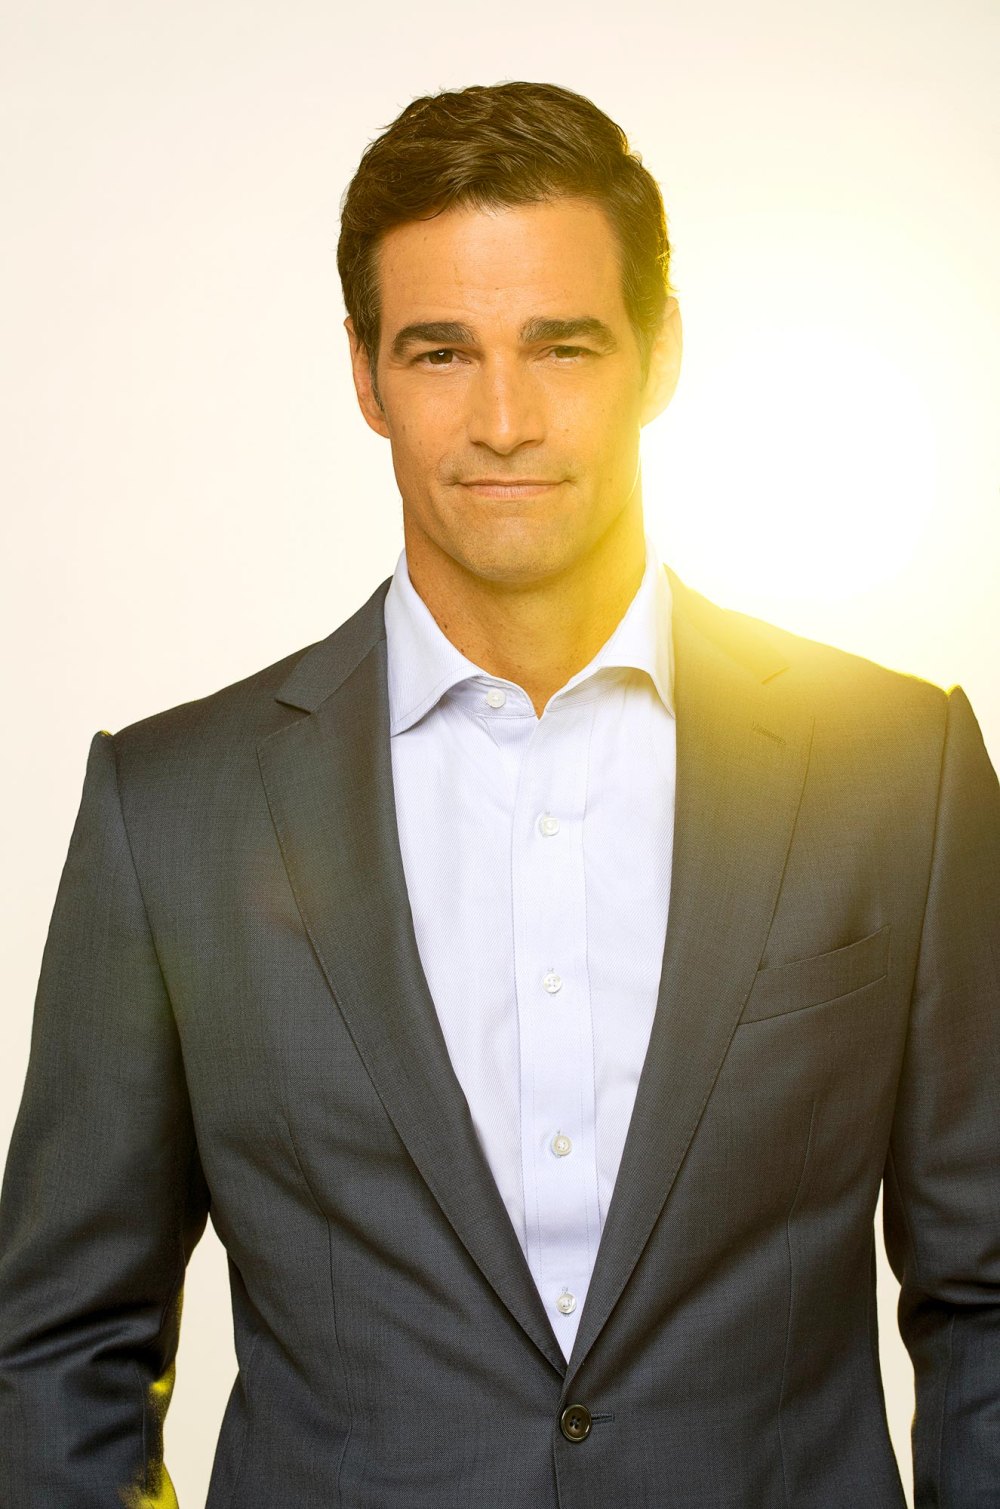 ABC News meteorologist Rob Marciano has been fired after nearly a decade at Network 415